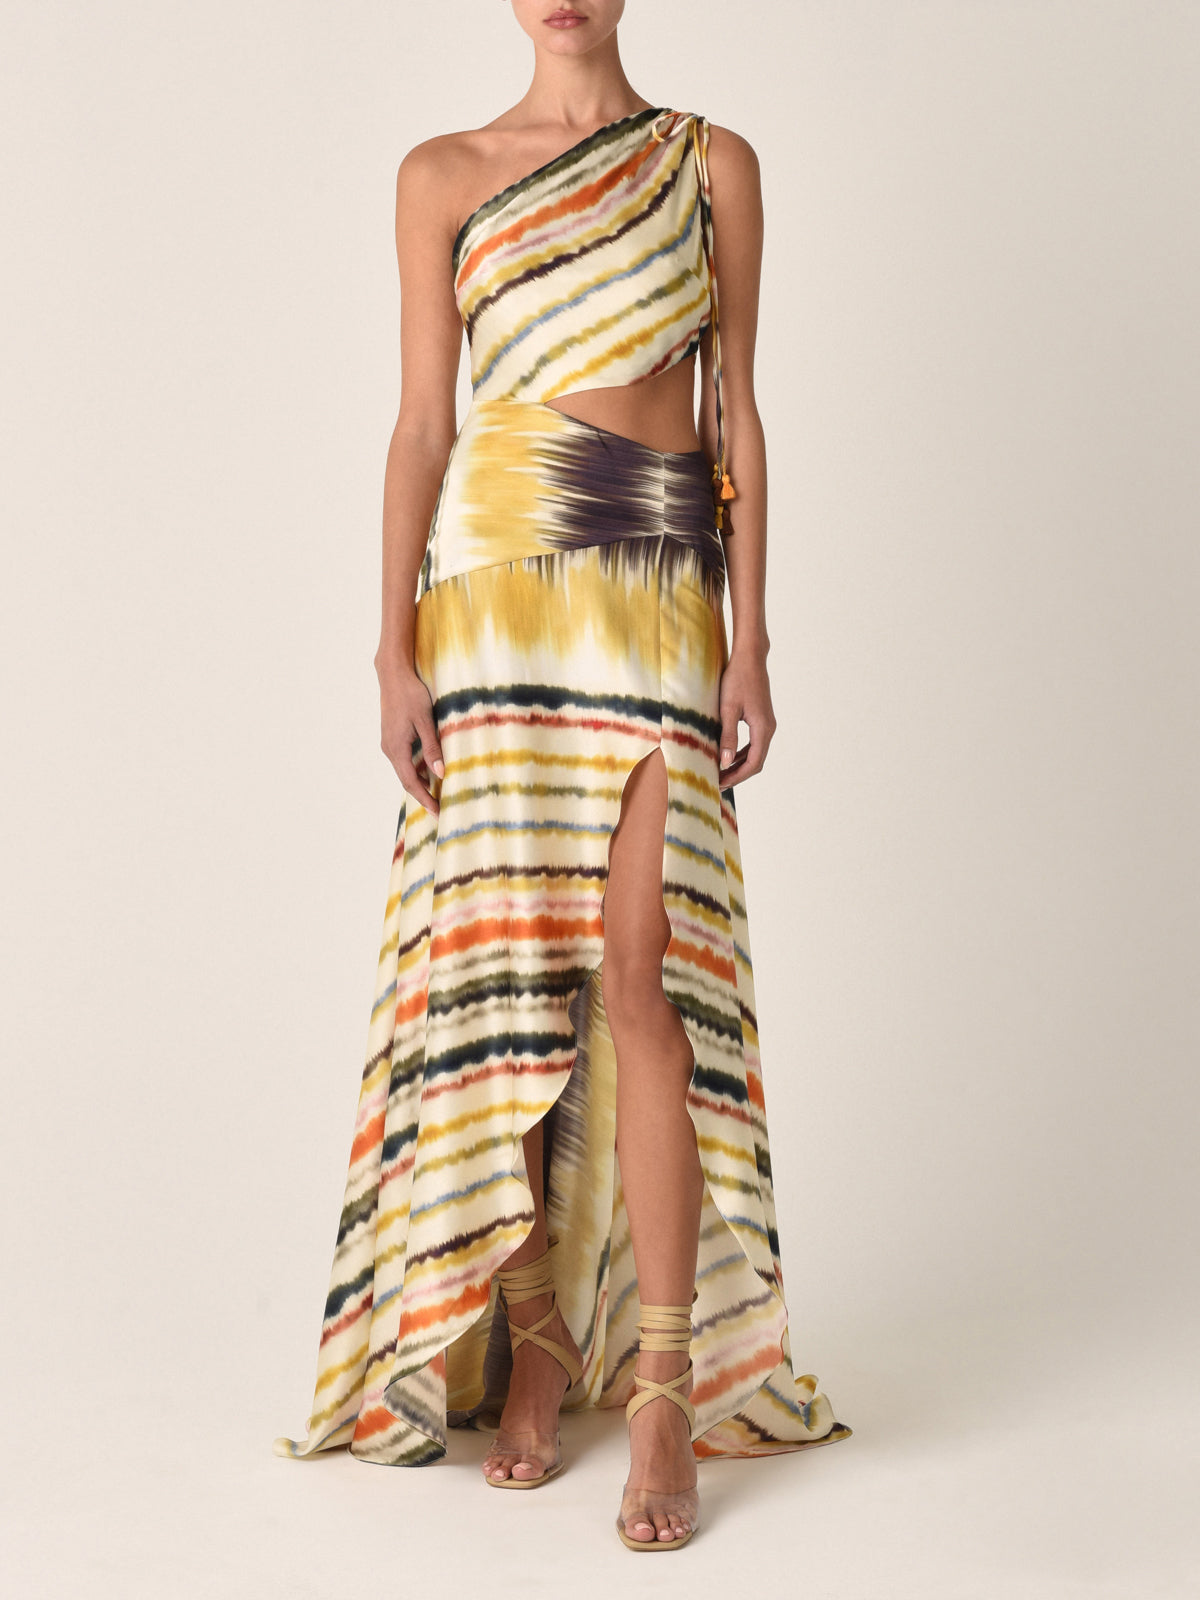 One-shoulder, asymmetric Whitney Dress Multi Hazy Stripe with a silk print and a cinched waist detail.